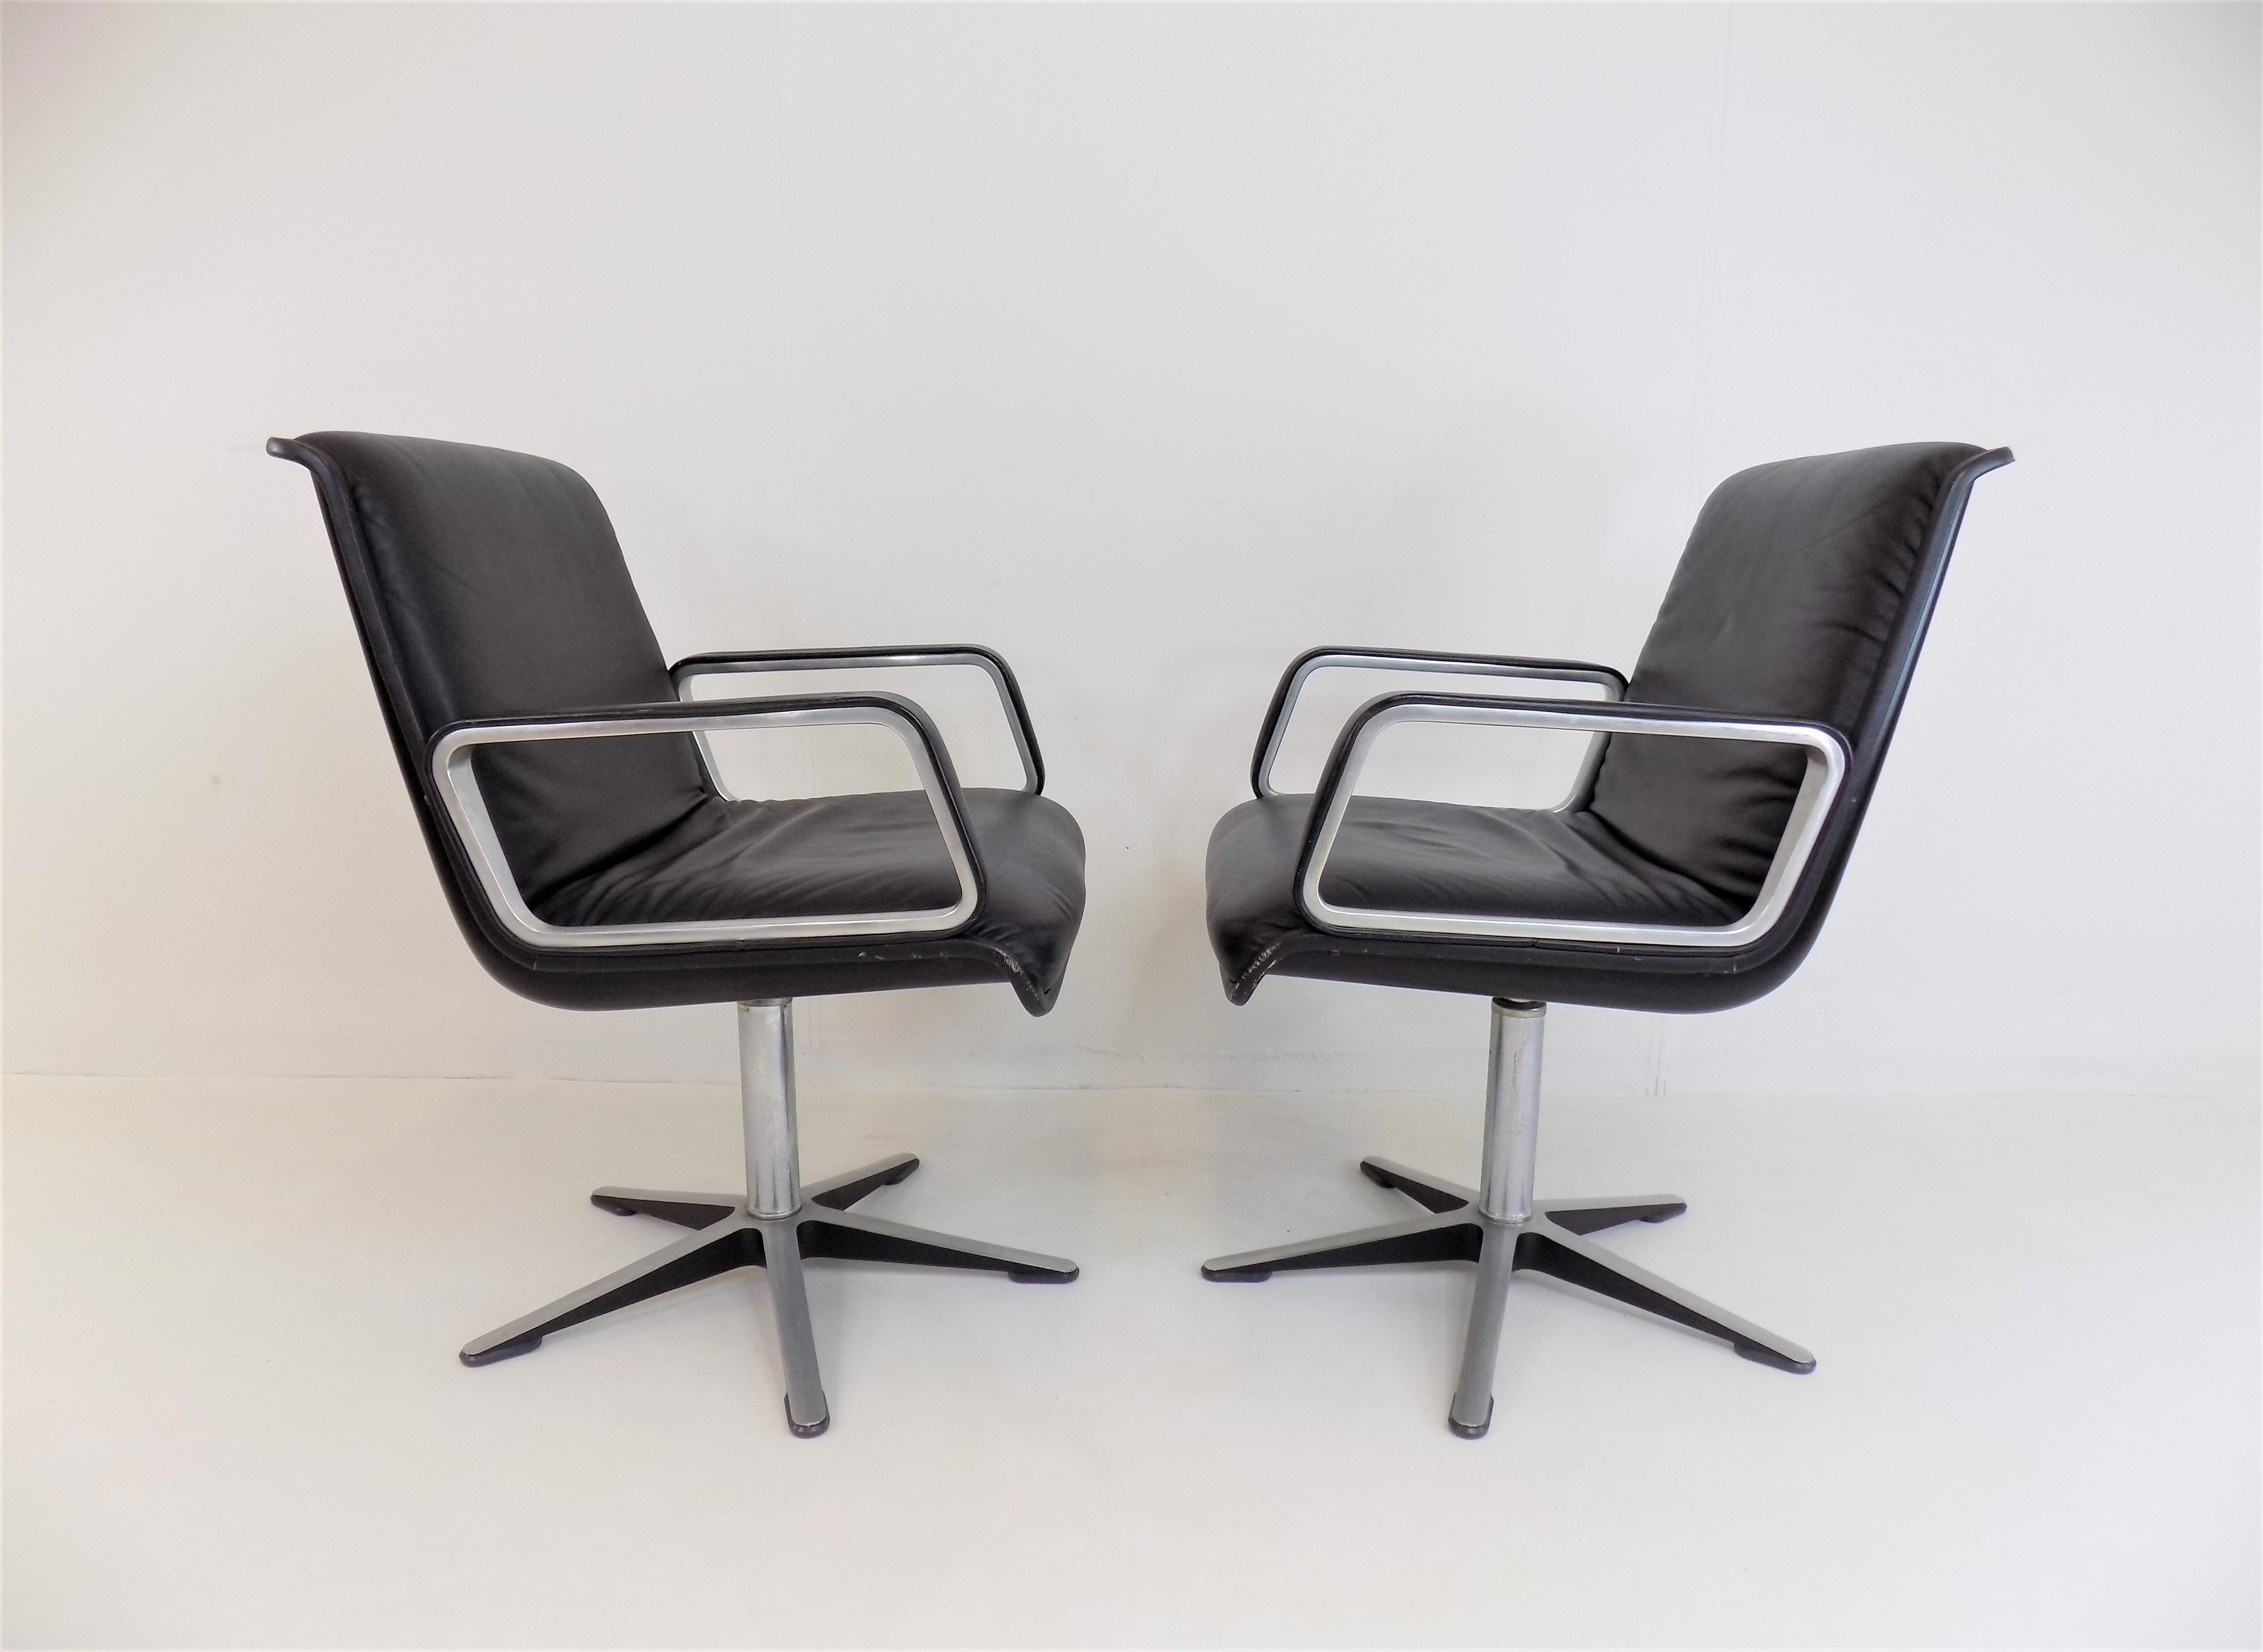 A set of 2 late generation Wilkhahn Delta leather armchairs, with fully leather clad brushed aluminum armrests and black back shells, which is in superb condition. The leather is flawless, the plastic shells and the aluminum feet only have slight